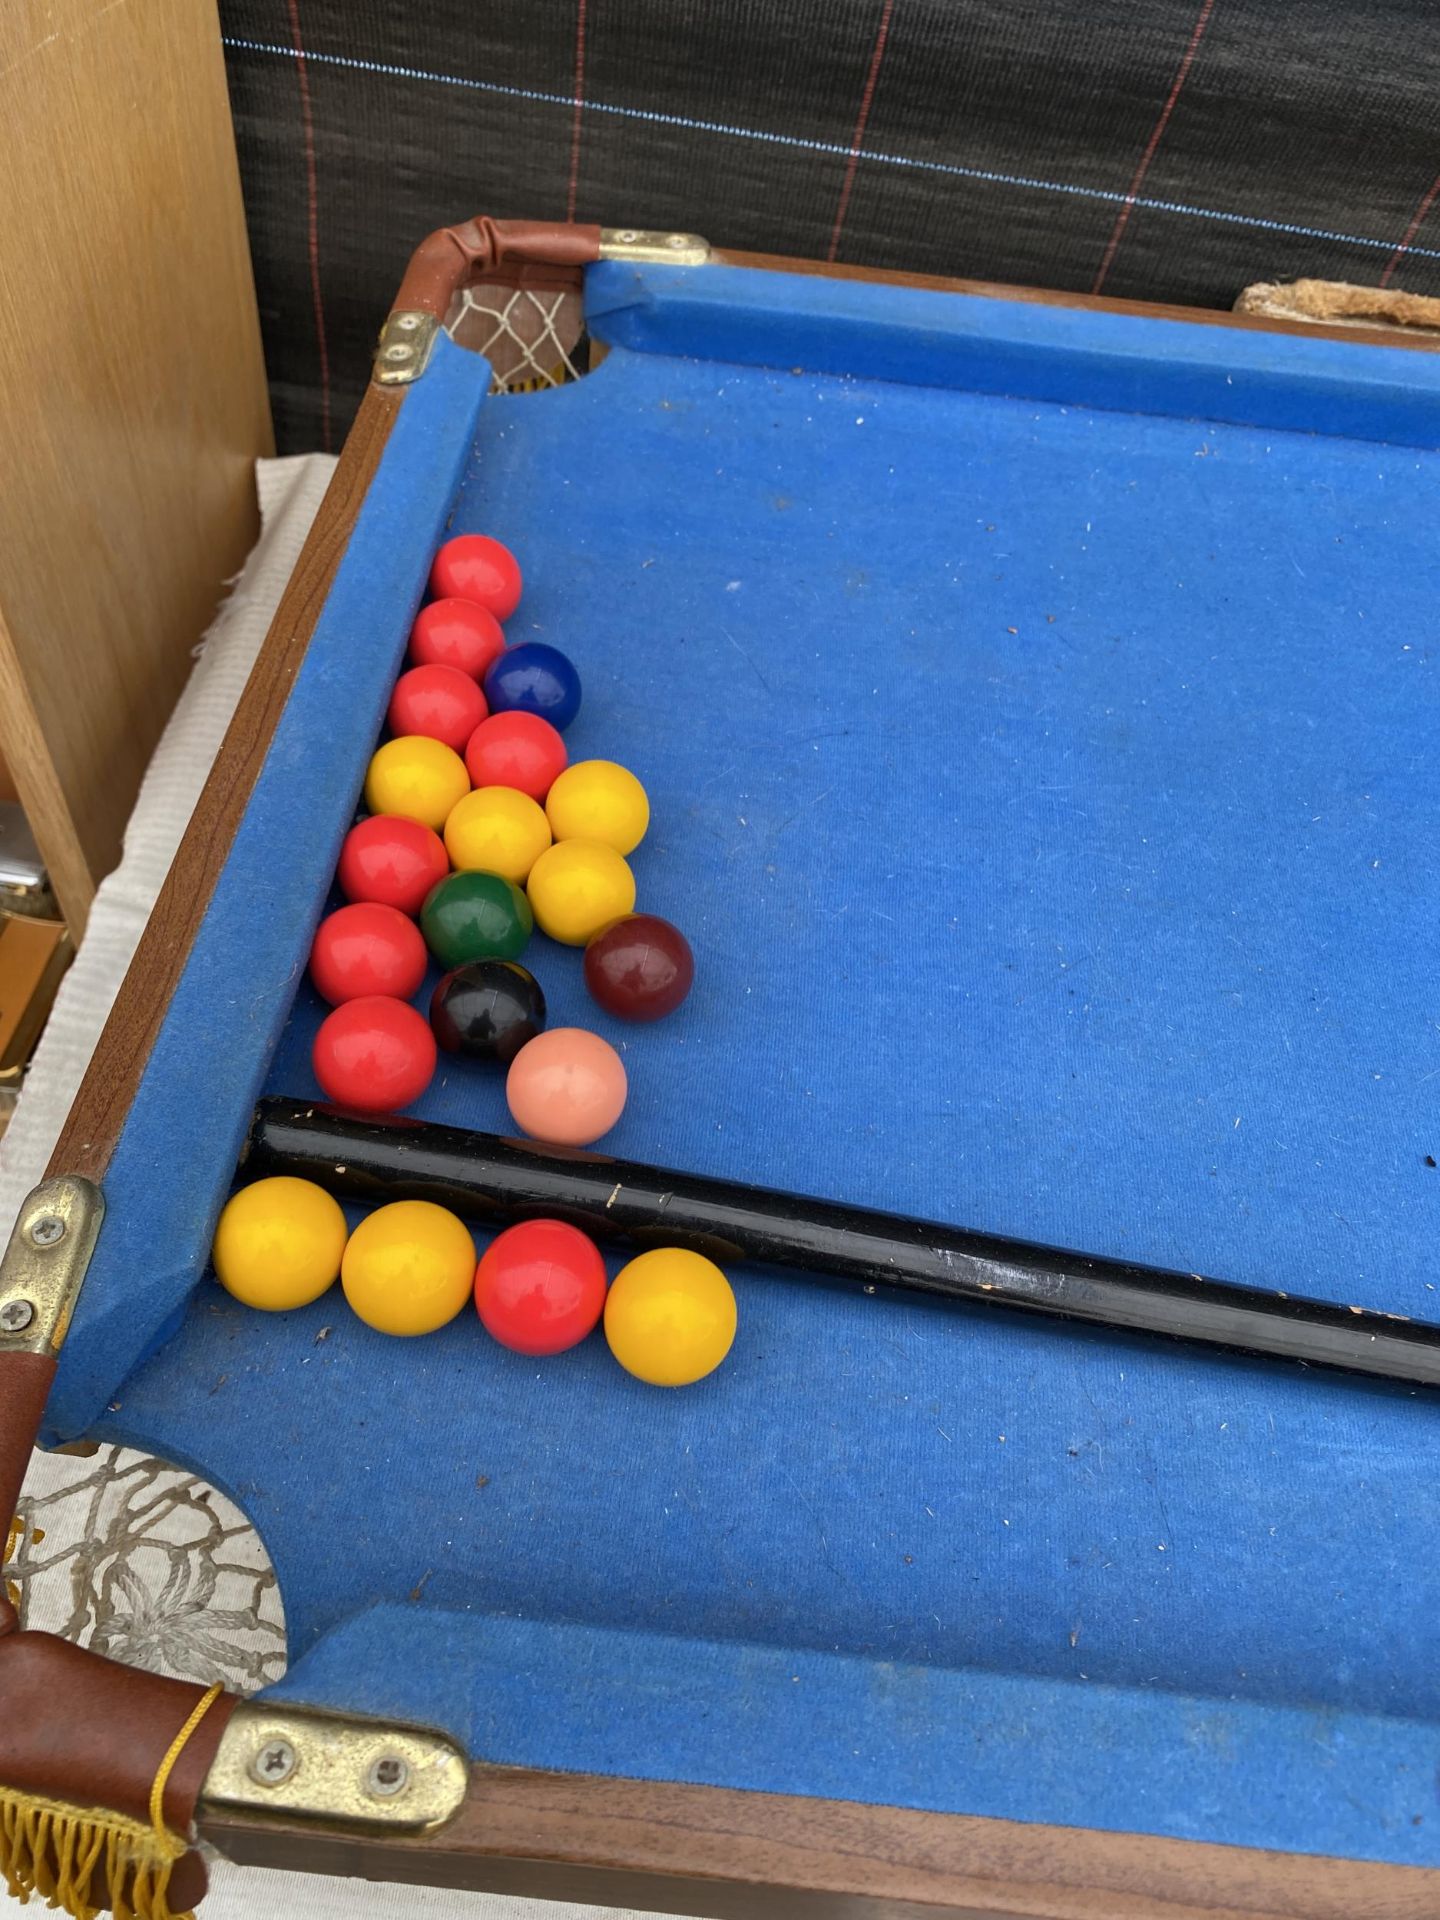 A TABLE TOP POOL TABLE WITH CUE AND BALLS - Image 3 of 4